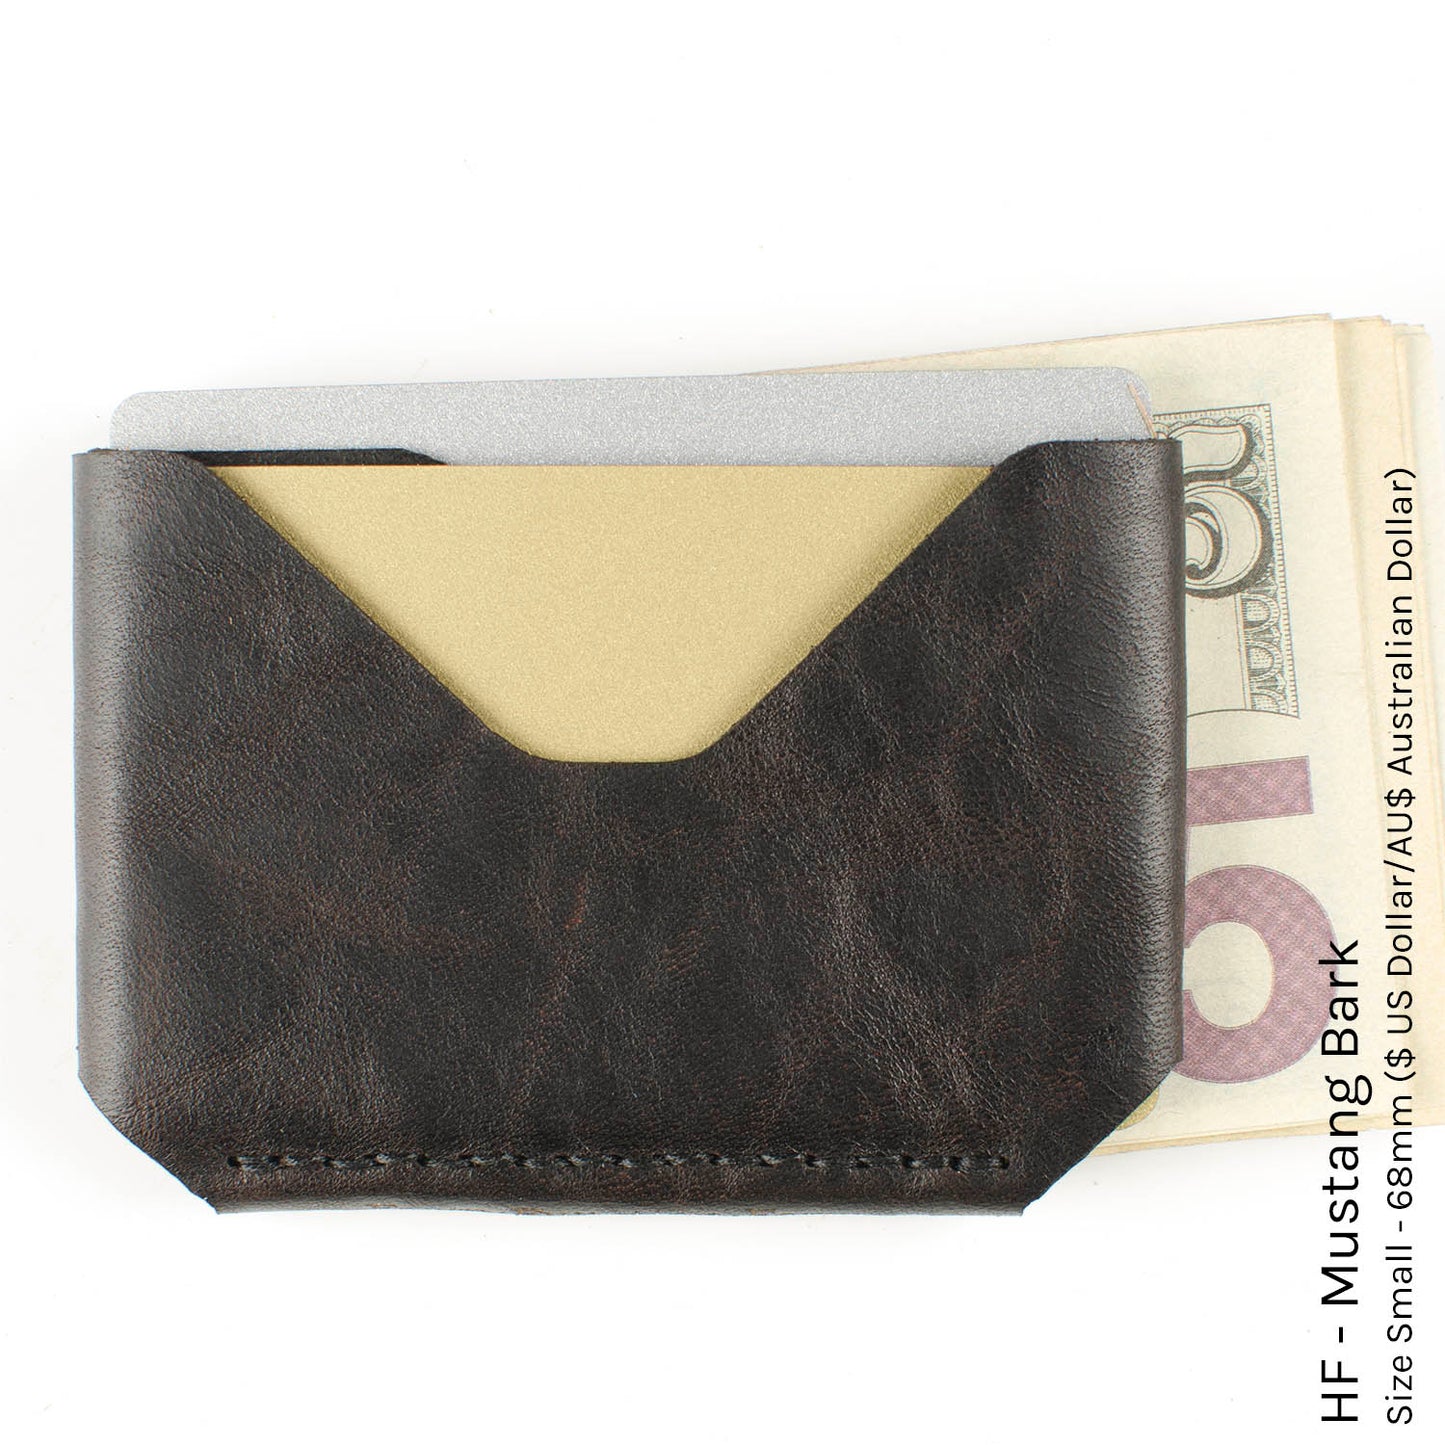 The Sidestep Wallet